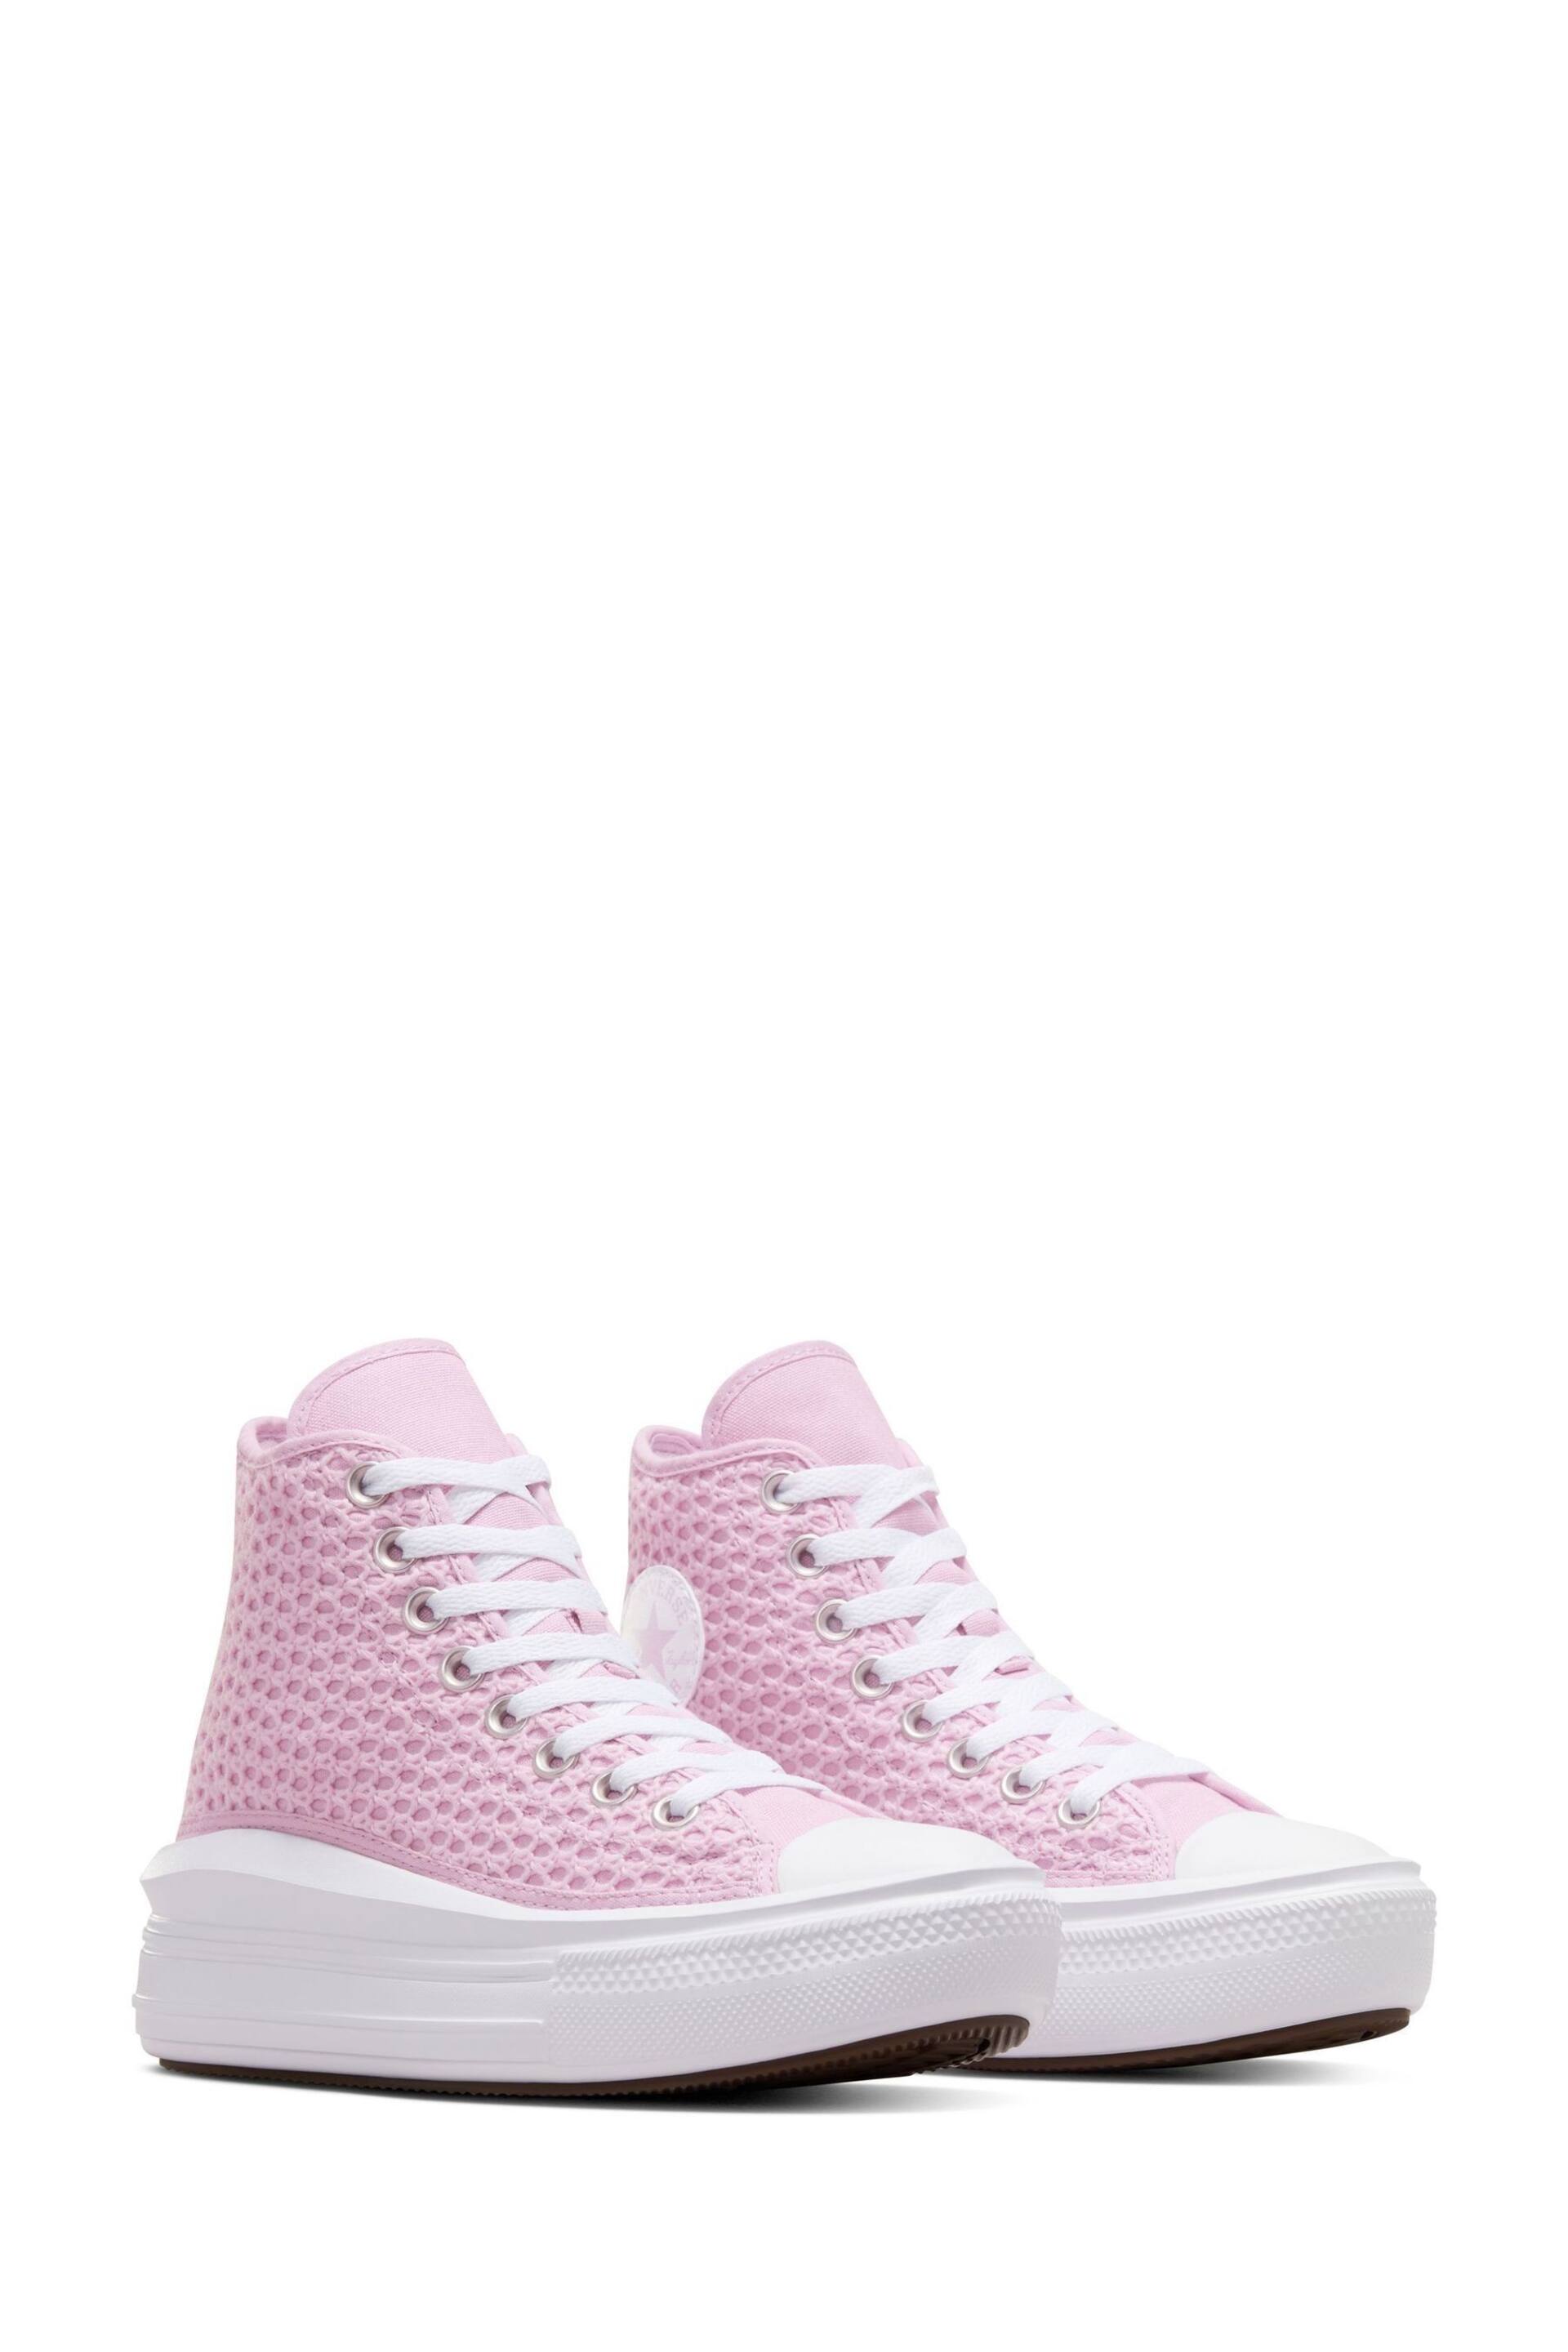 Converse Pink Chuck Taylor Crochet Move Youth Trainers - Image 4 of 8